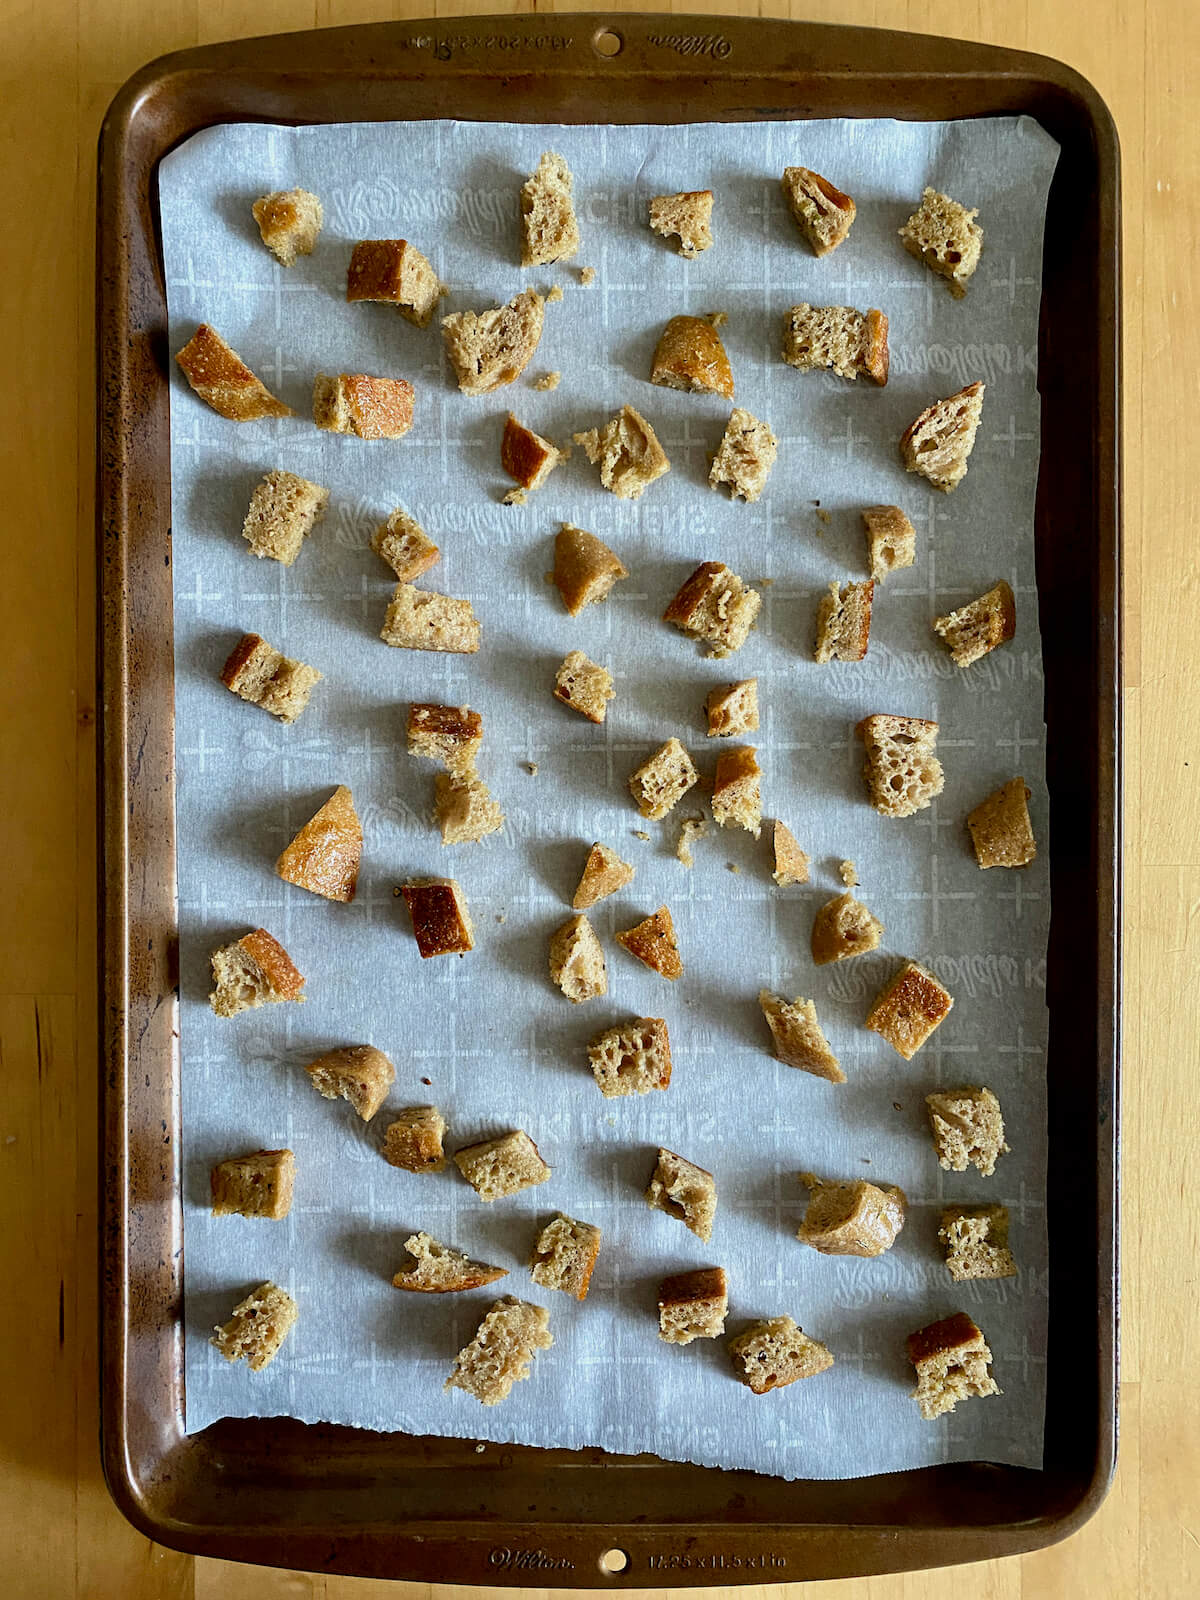 Seasoned sourdough bread cubes spread out on a parchment-lined baking sheet.